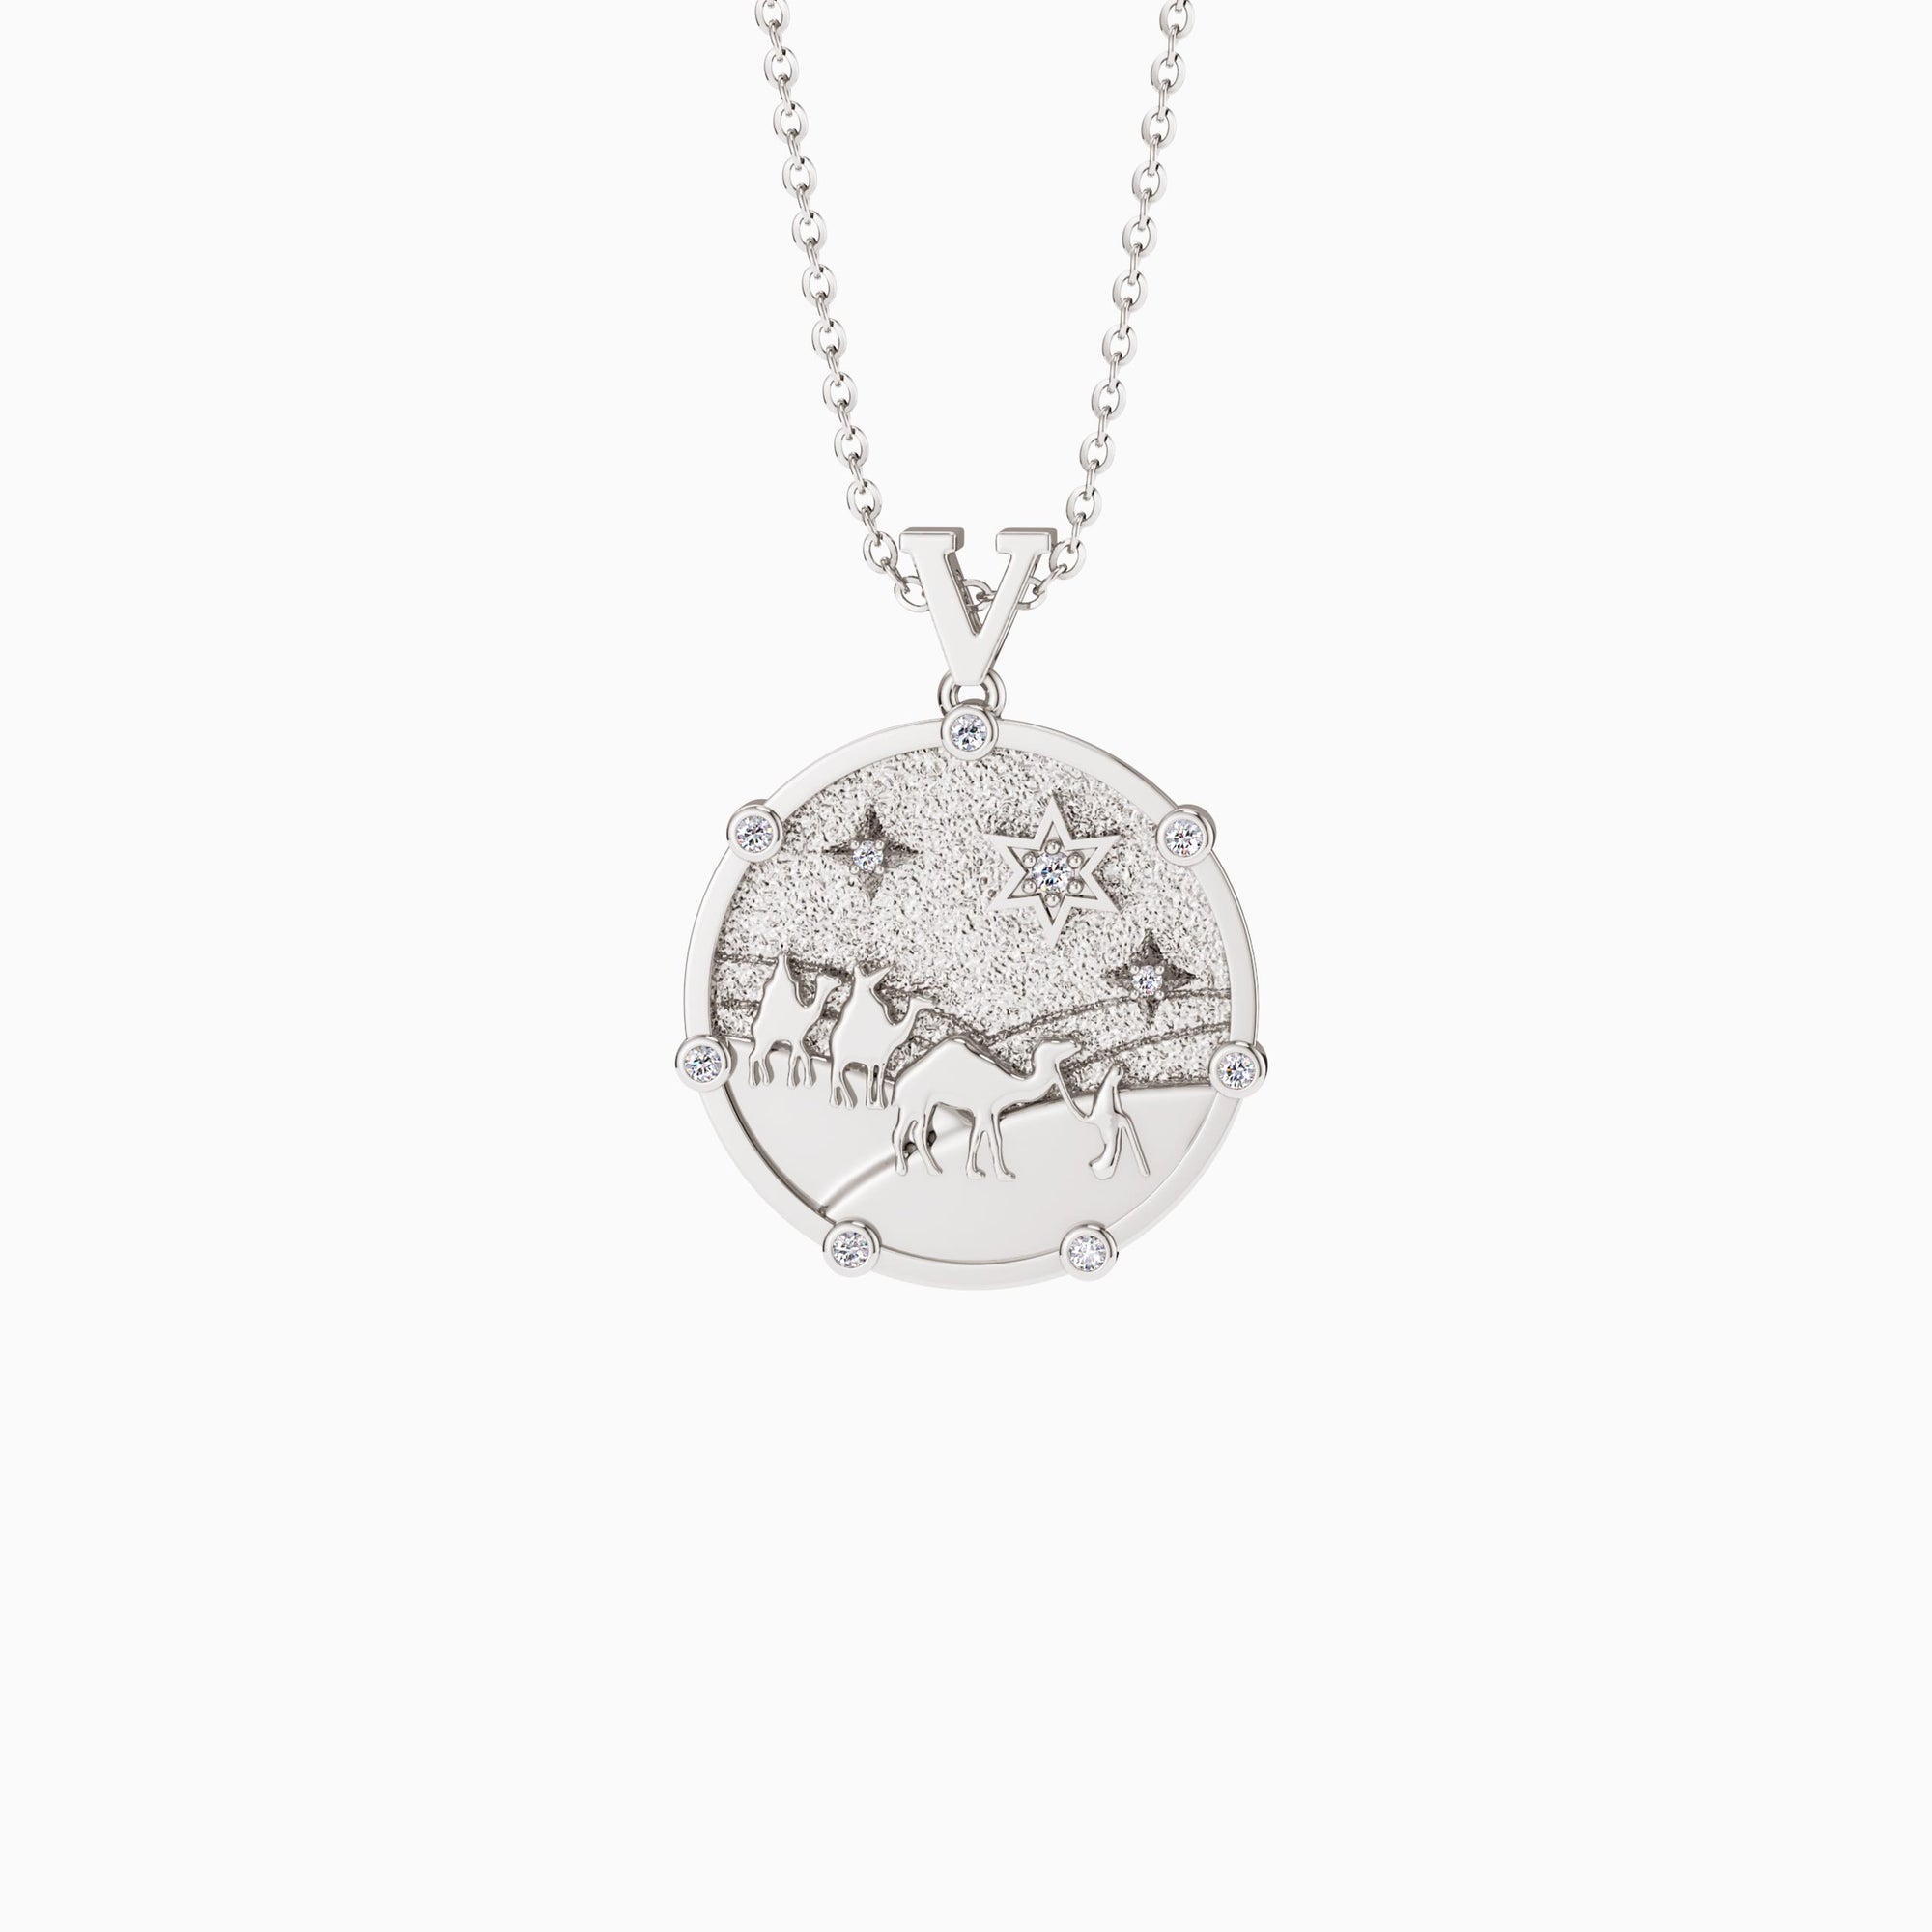 Promised Land Follow Your Star Three Wise Men Coin Medallion Necklace - vanimy